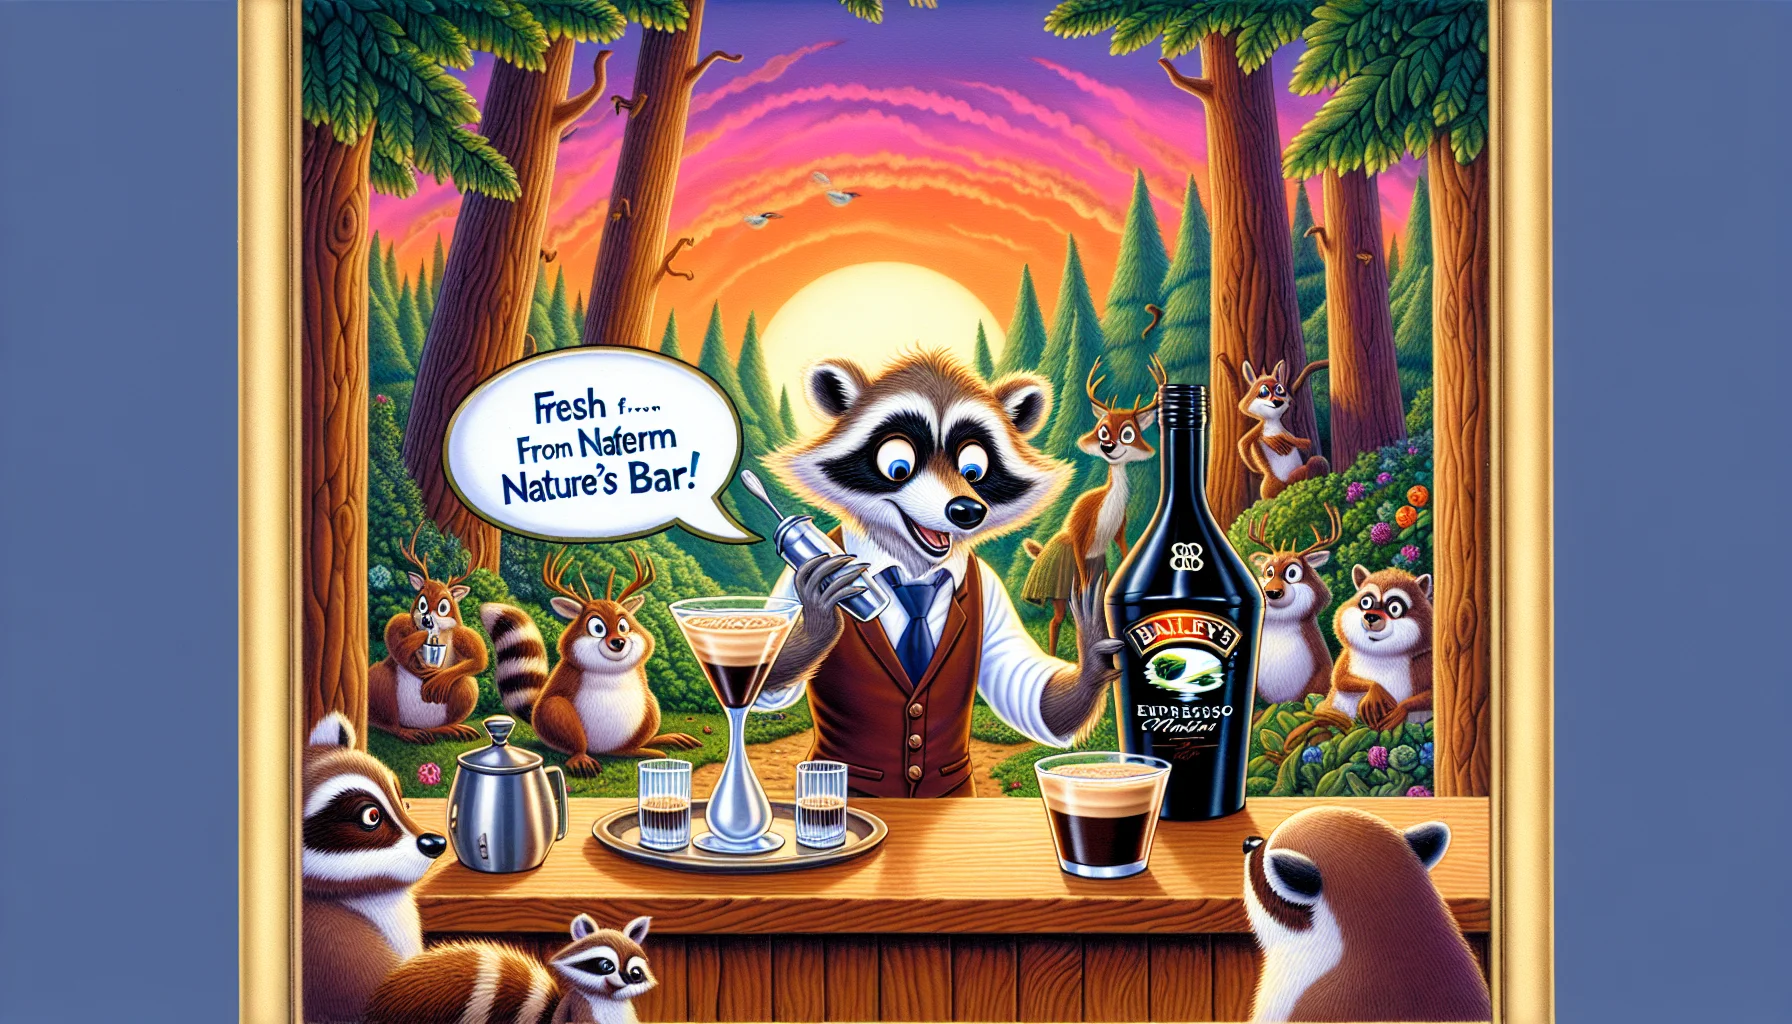 Imagine an amusing and enticing scenario that showcases a Bailey's Espresso Martini. Picturise a regally dressed cartoon raccoon, with a barista apron, expertly preparing this cocktail in a picturesque forest bar. With one hand, it shakes the cocktail shaker, and in the other, it holds a spoon dipped into a bottle of Bailey's Irish Cream. Word bubbles above the raccoon say, 'Fresh from nature's bar!'. Around, curious woodland creatures watch in awe, some even lined up with cocktail glasses. Behind, the setting sun paints a vibrant orange and pink background, bringing to life this enchanting woodland cocktail hour.